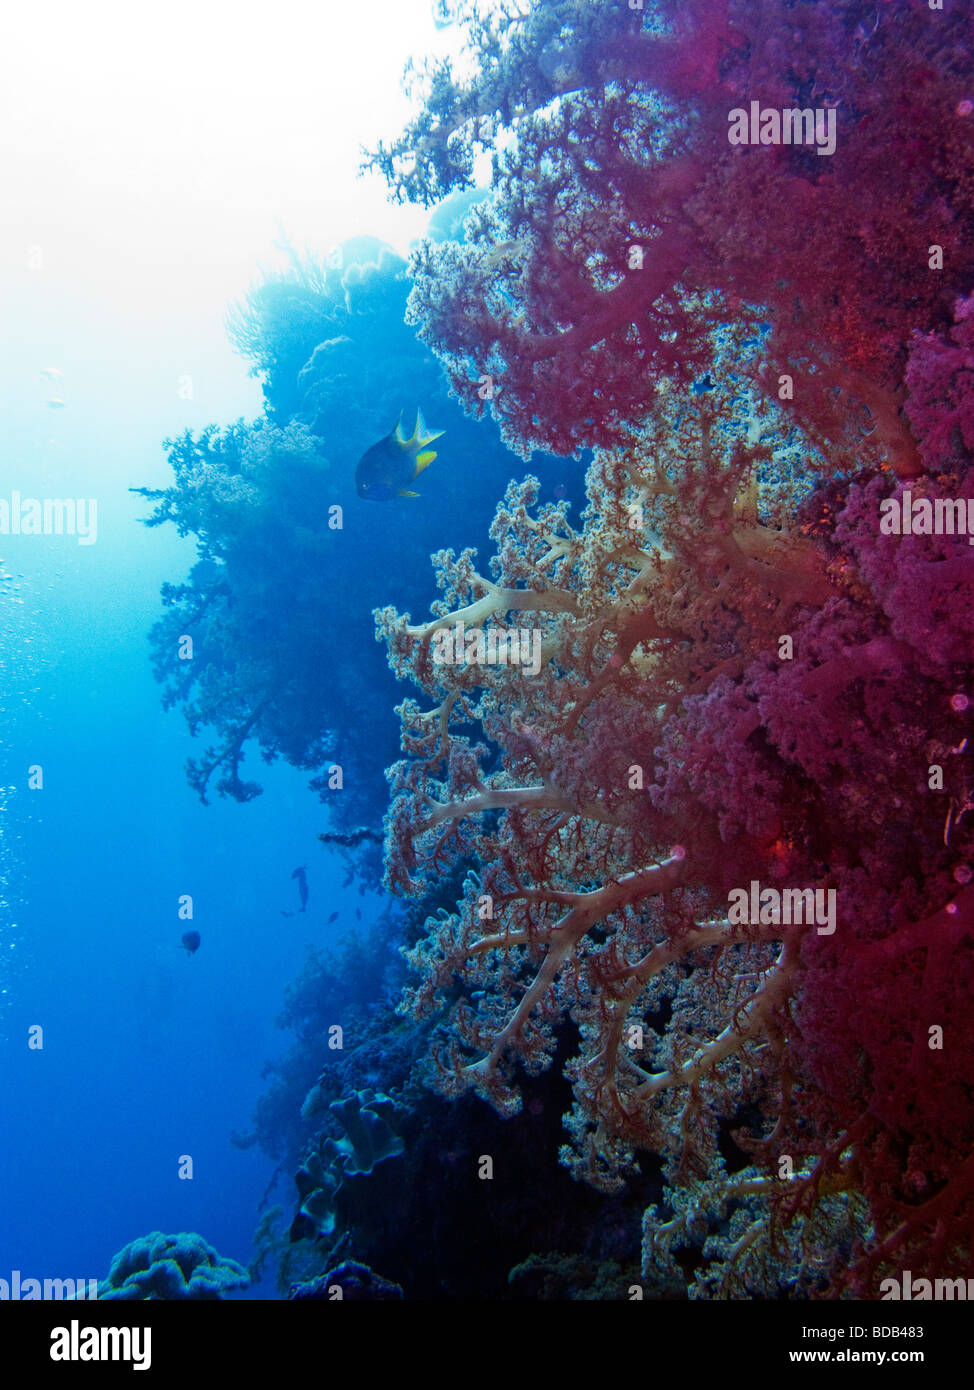 Indonesia Sulawesi Wakatobi National Park underwater colourful soft corals on coral reef wall Stock Photo